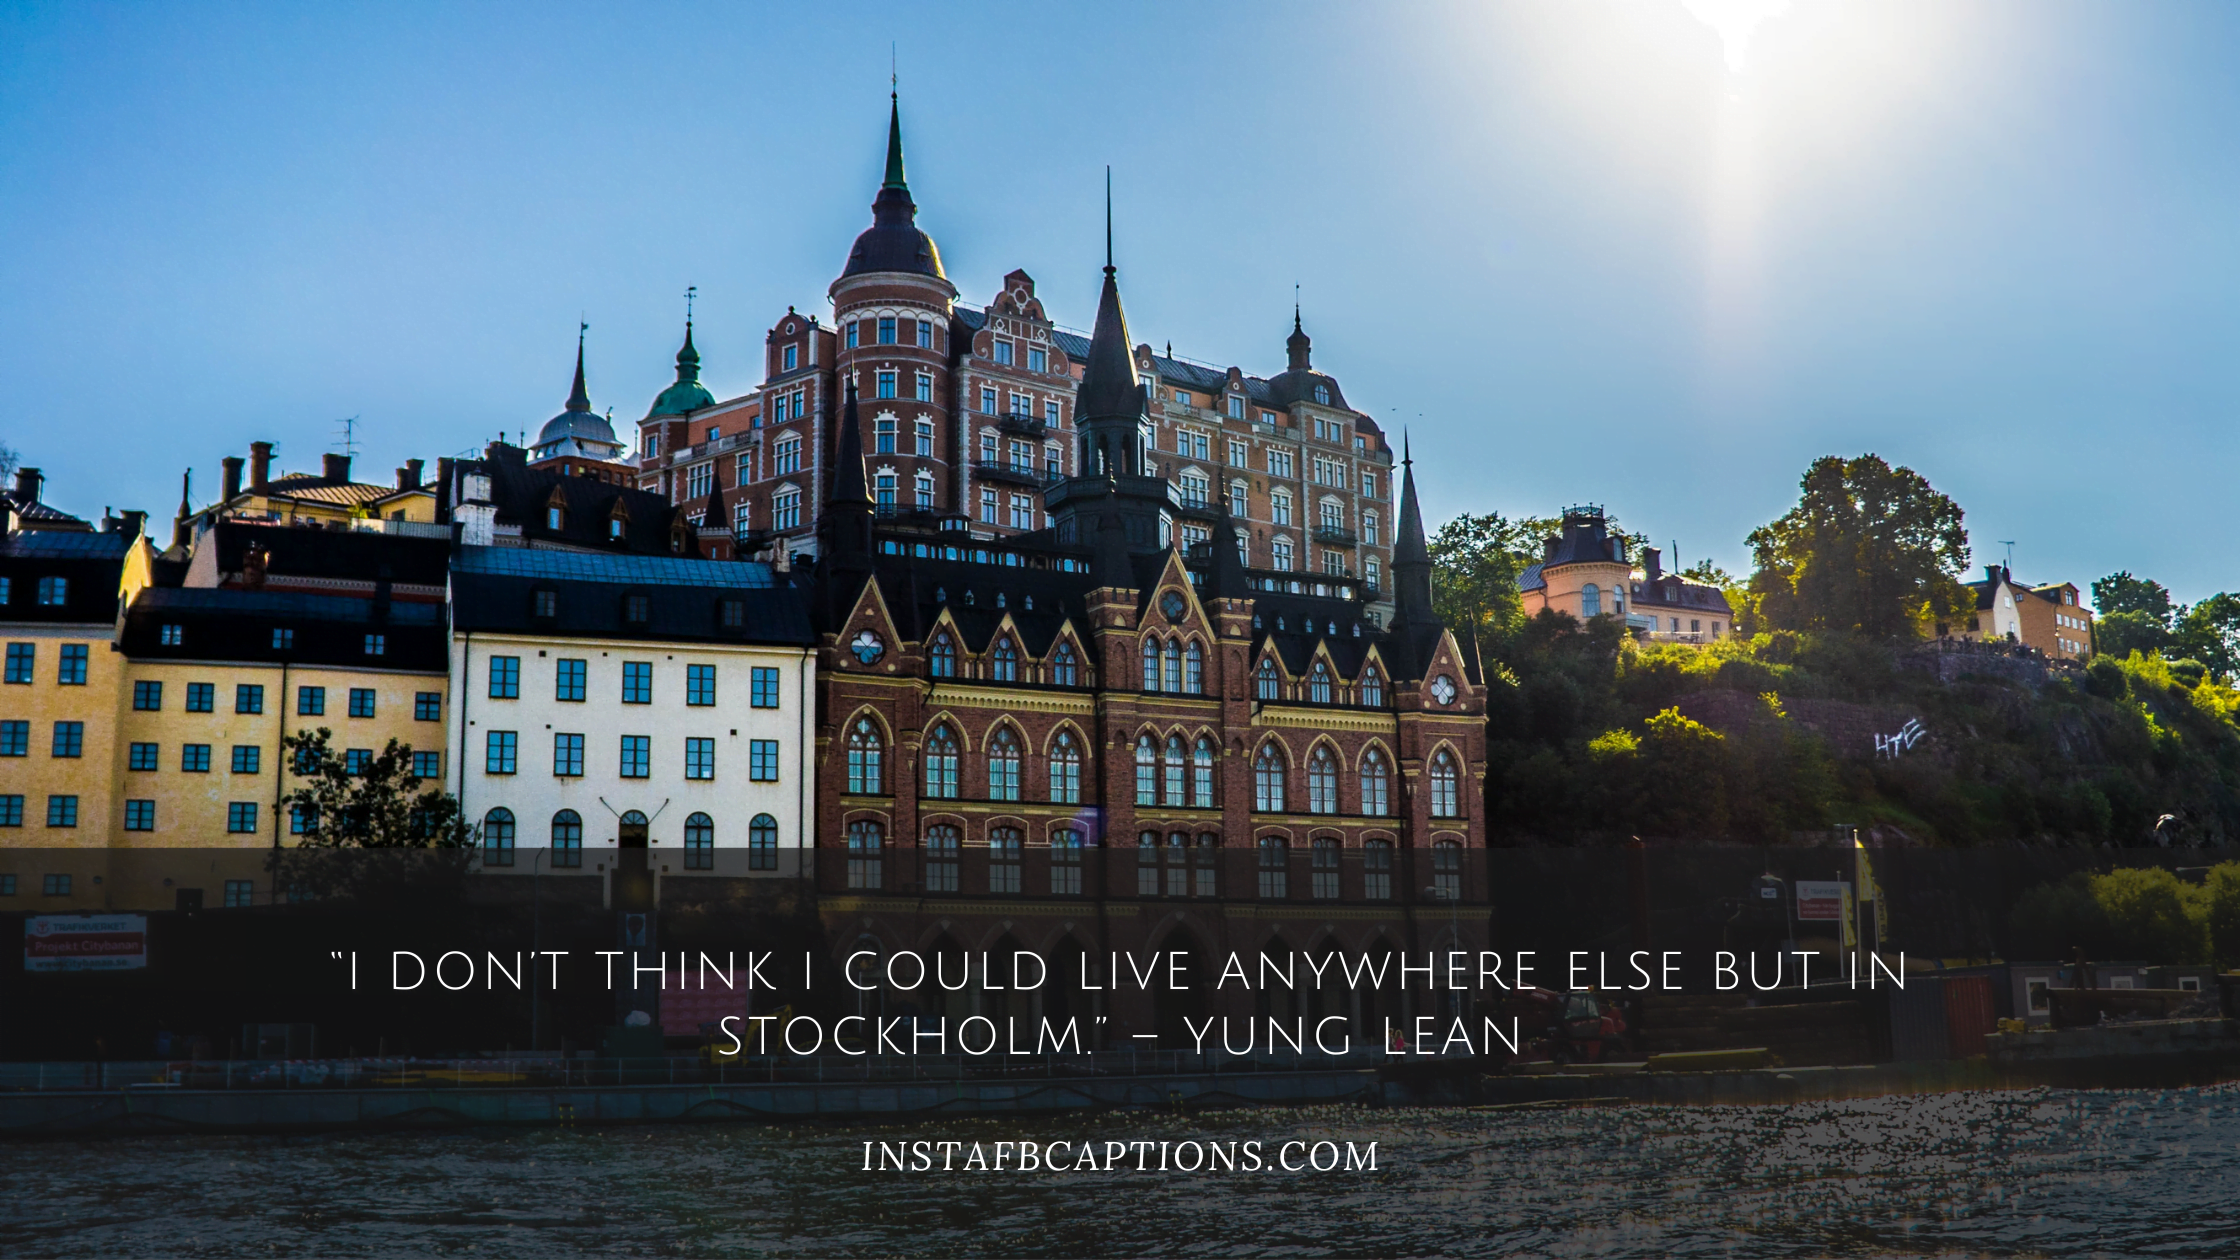 Stockholm Quotes And Captions  - Stockholm Quotes and Captions  - 87 Stockholm Instagram Captions &#038; Quotes 2022